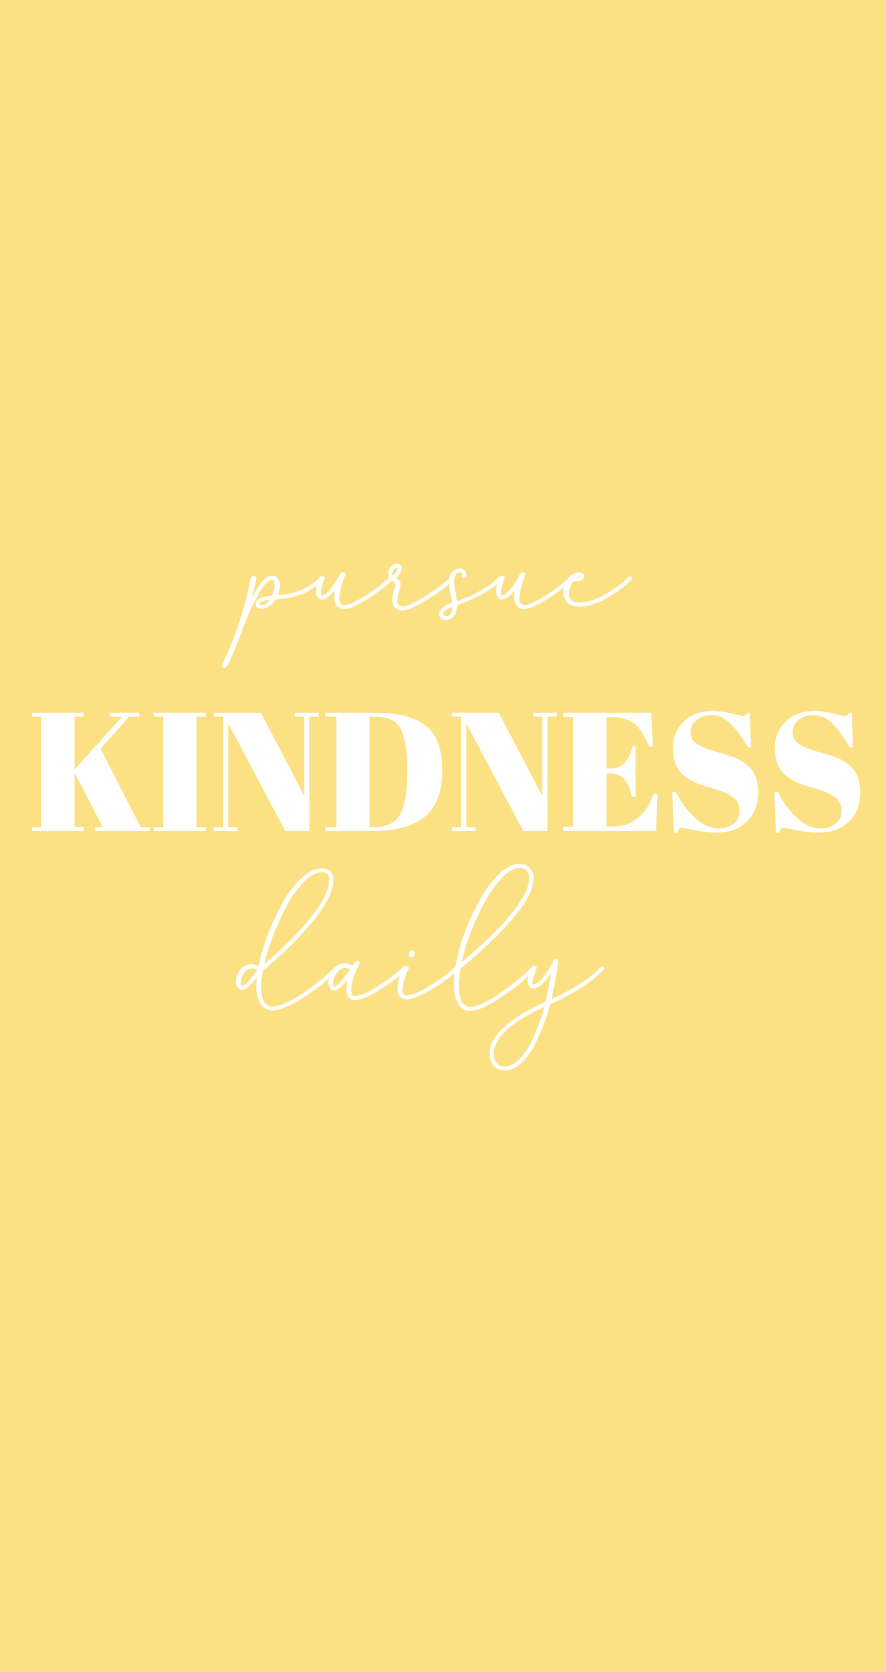 Pursue kindness daily yellow quote iphone wallpaper yellow iphone background quote wallpap Purs. iPhone background quote, Yellow quotes, iPhone wallpaper yellow